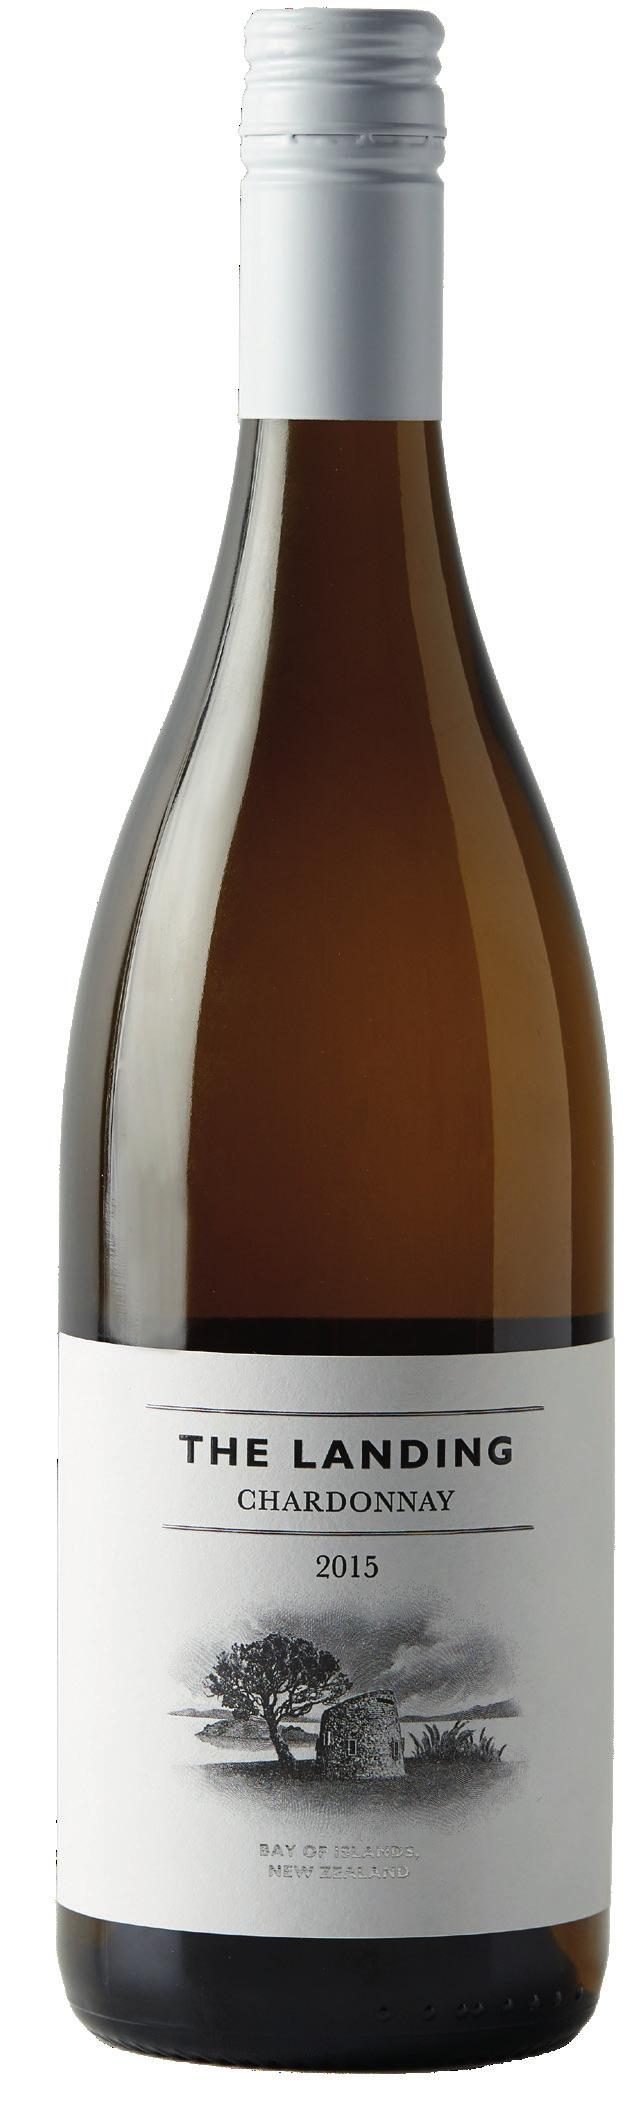 THE LANDING CHARDONNAY 2015 Grown on the coastal slopes overlooking the Bay of Islands, the 2015 Chardonnay is an expression of citrus, stonefruit and fine oak flavours, with a long and delicious